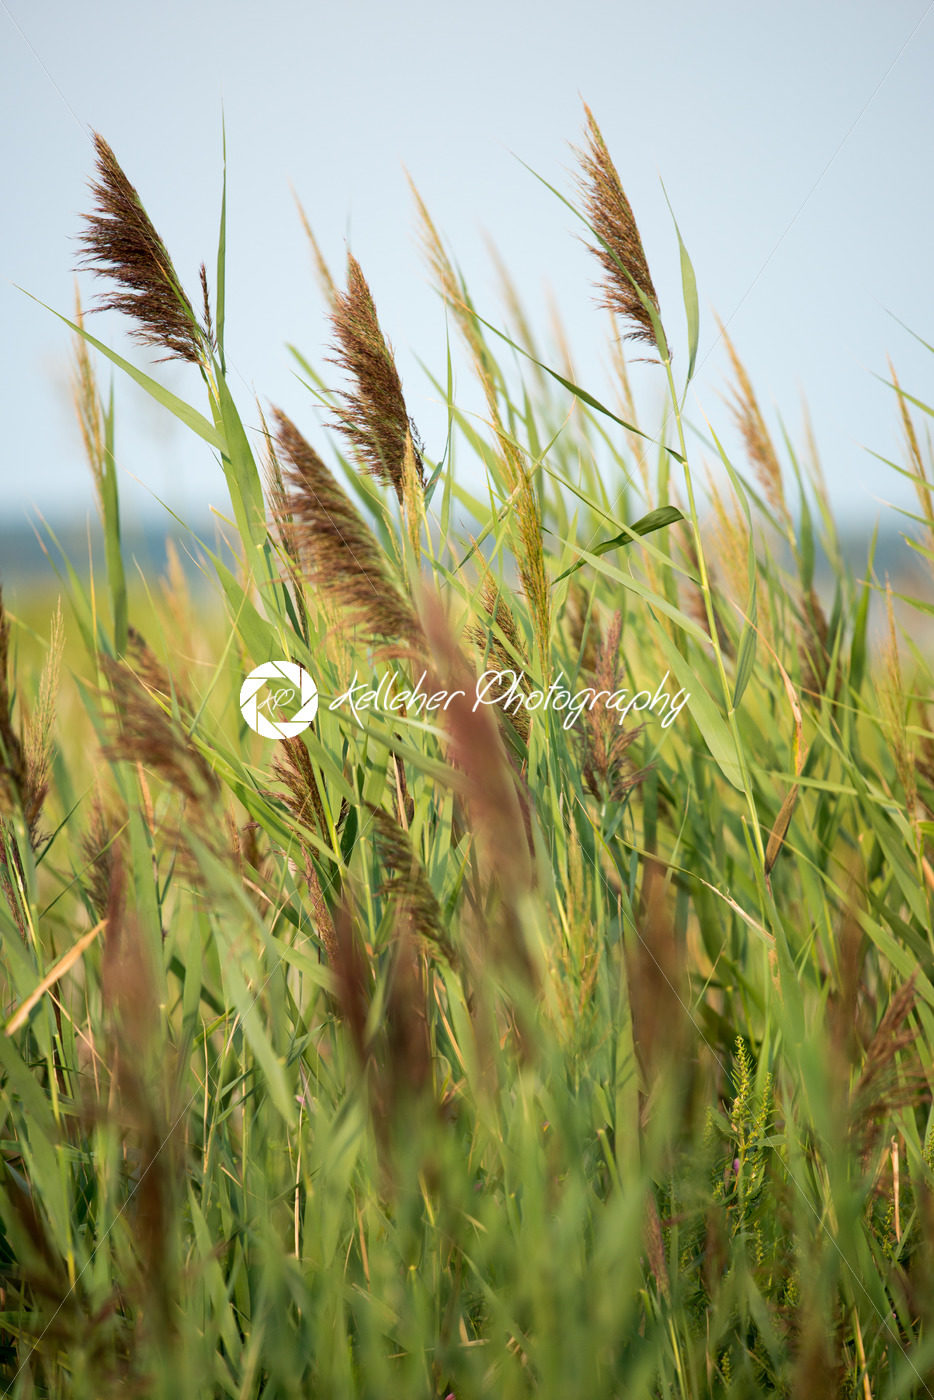 Thickets of reeds on Maryland Eastern Shore near Rock Hall, MD - Kelleher Photography Store